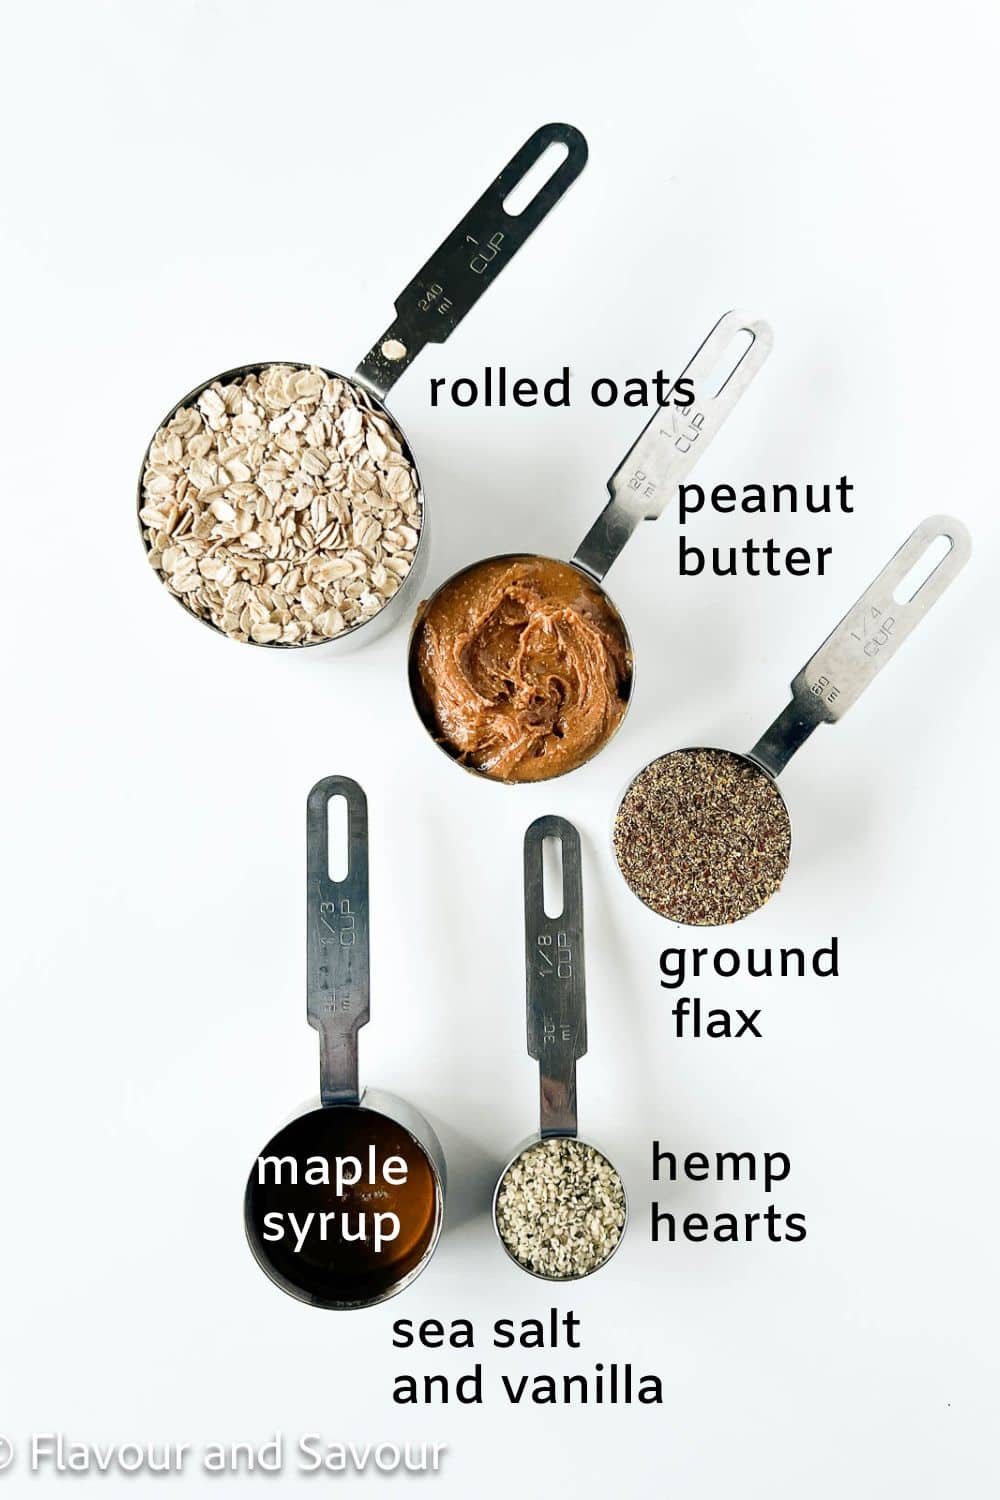 Labelled ingredients for no-bake oatmeal energy bites: rolled oats, peanut butter, ground flax, hemp hearts, maple syrup, vanilla and sea salt.